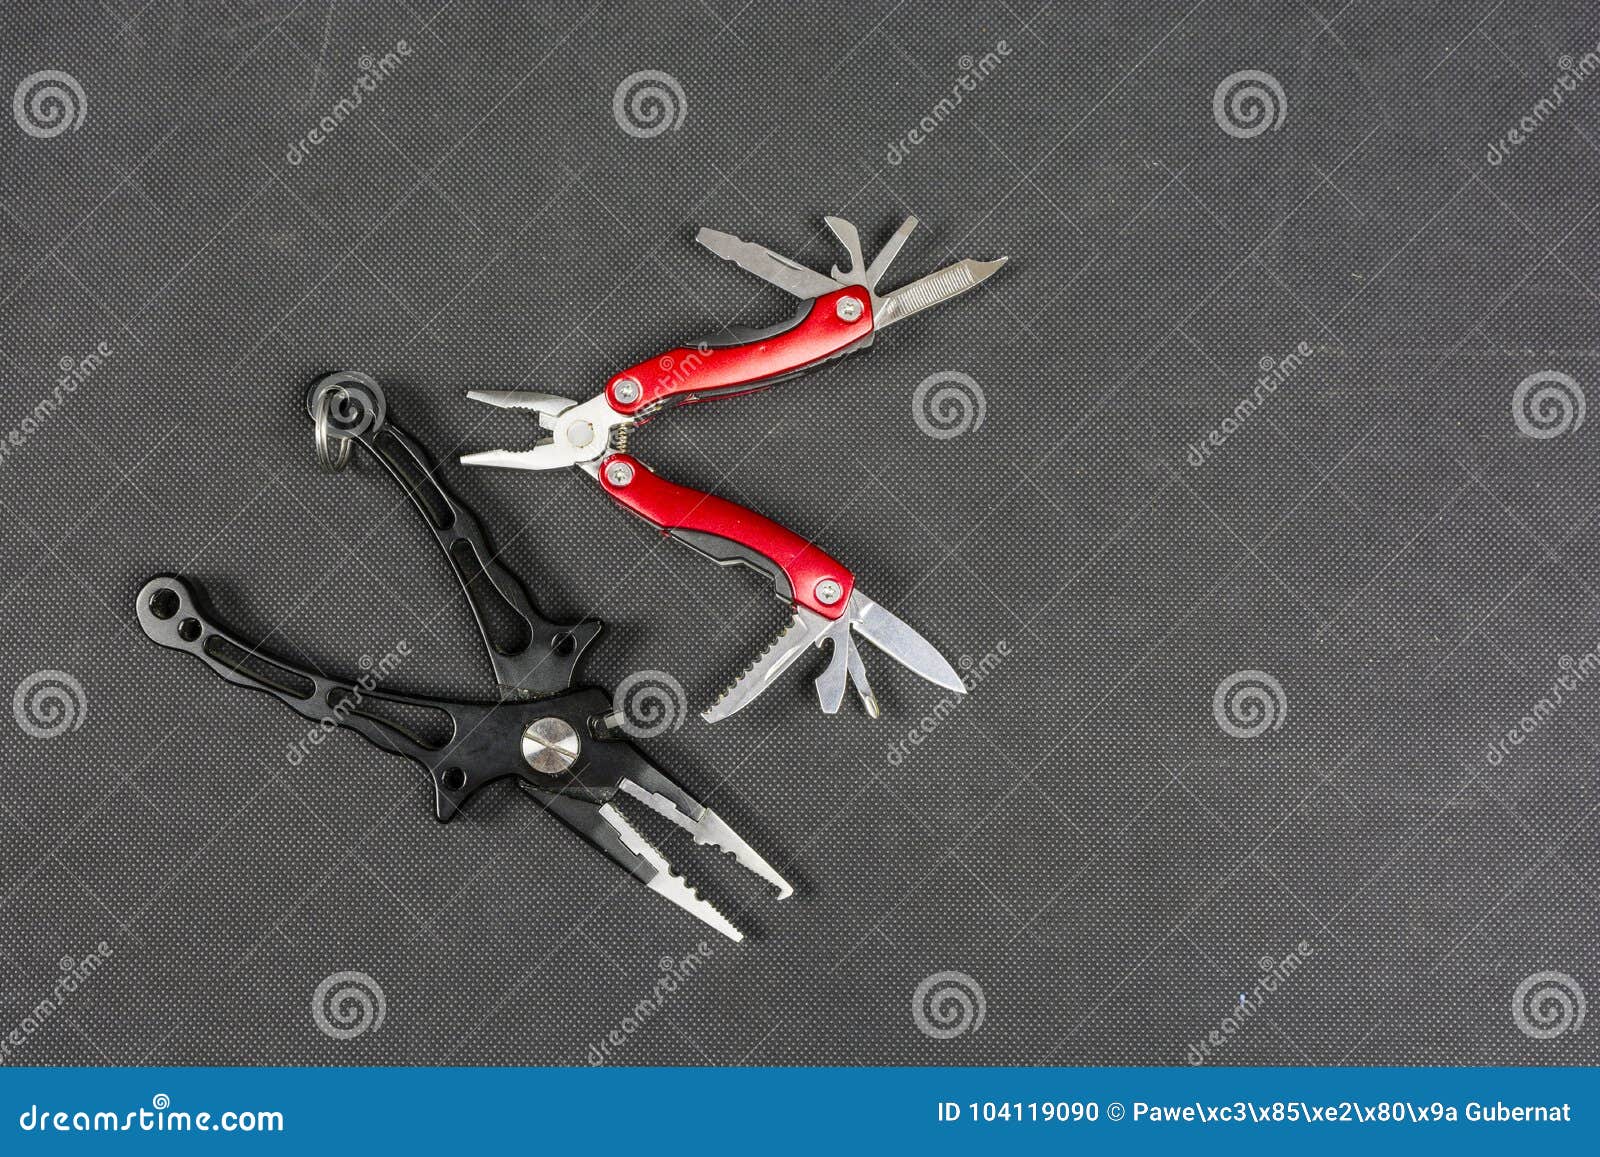 https://thumbs.dreamstime.com/z/black-pliers-red-folding-multifunctional-tool-anglers-place-description-black-pliers-red-folding-multifunctional-104119090.jpg